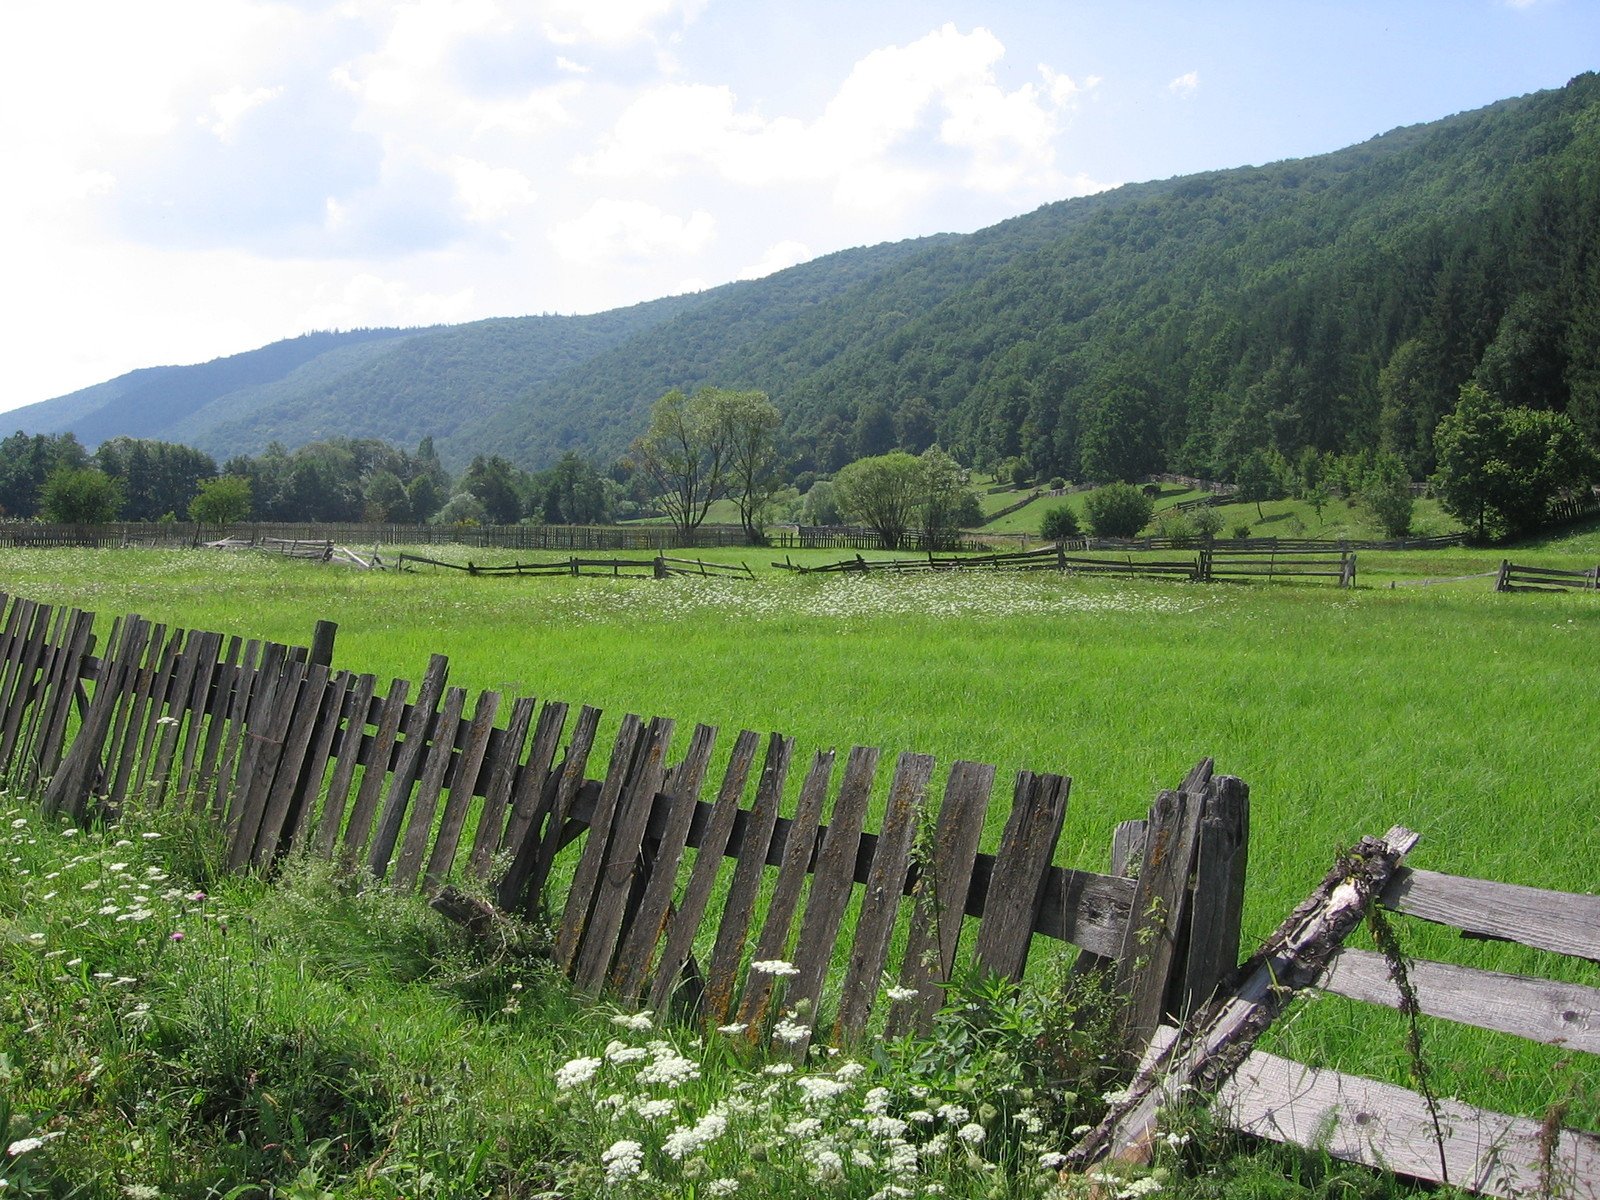 a grassy meadow with fence next to a field